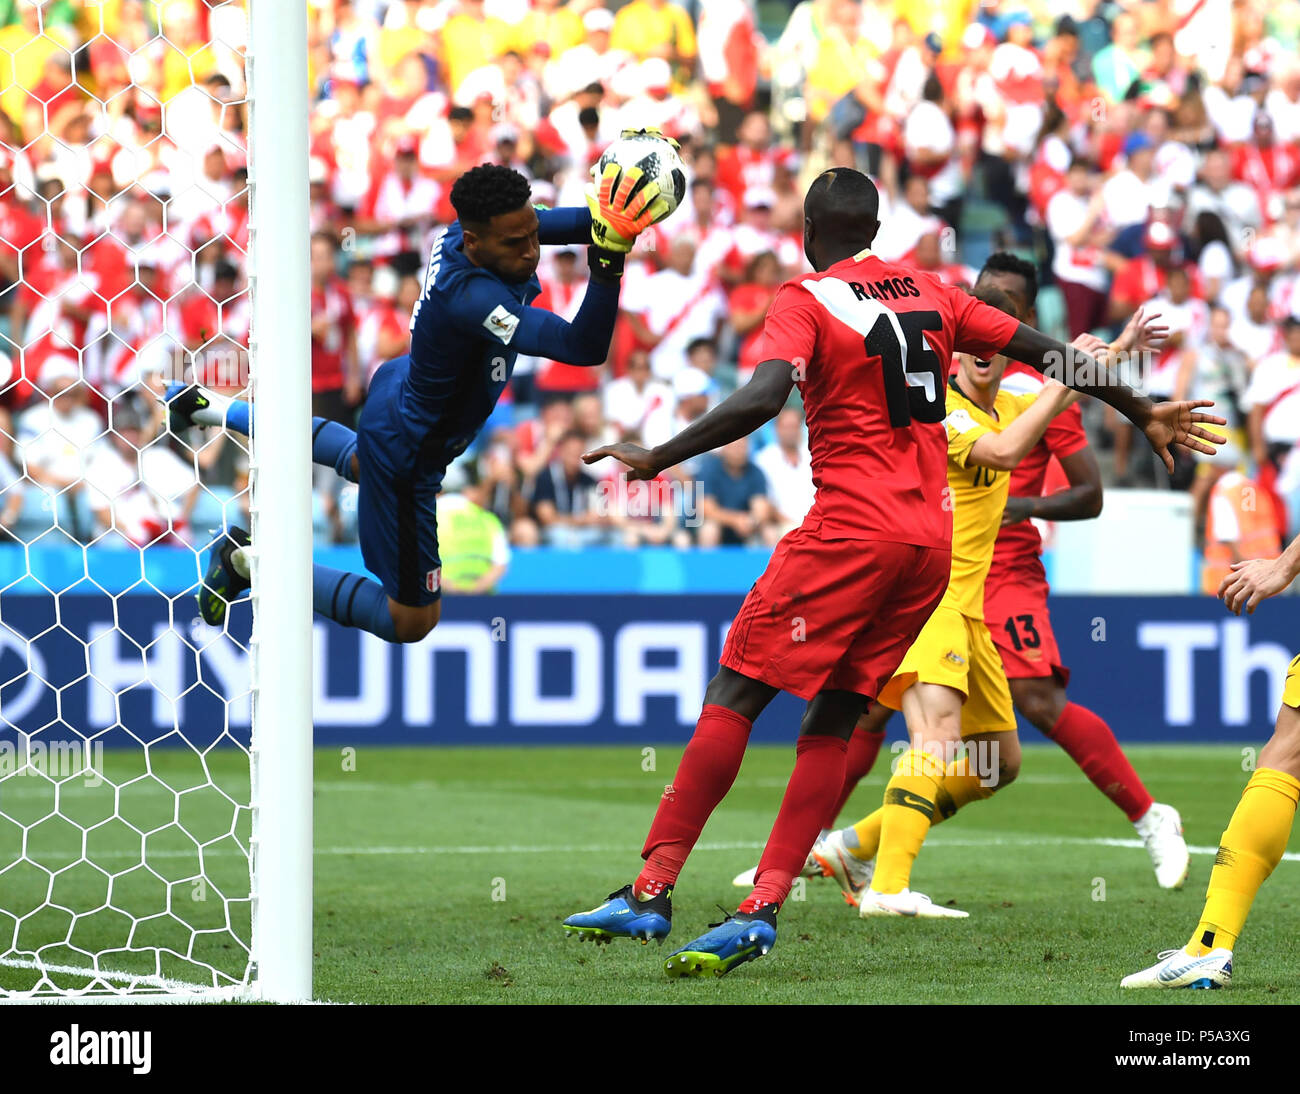 Sochi, Russia. 26th June, 2018. Goalkeeper Pedro Gallese (L) of Peru defends during the 2018 FIFA World Cup Group C match between Australia and Peru in Sochi, Russia, June 26, 2018. Credit: Chen Cheng/Xinhua/Alamy Live News Stock Photo